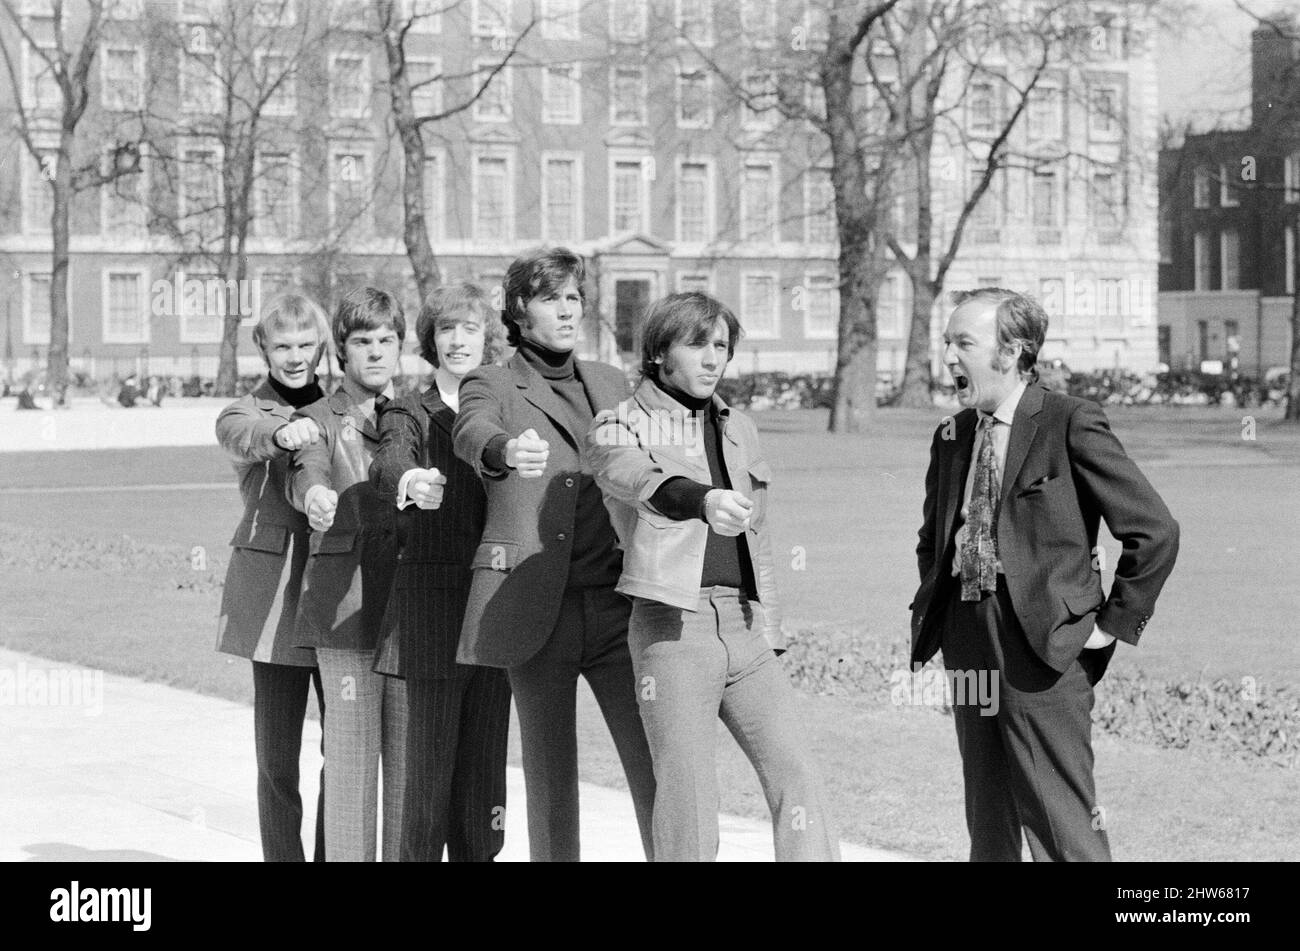 The Bee Gees are put through their paces by Britain's top comedy writer Johnny Speight, who will be writing the screenplay for their first full length feature film 'Lord Kitchener's Little Drummer Boys'. The plot concerns the press ganging of the boys to join the army as bandsmen during the Boer War, filming starts later this year.   Johnny marches The Bee Gees through London as he gives them a taste of what's to come 29th March 1968.    Pictured (l to r) Vince Melouney, Colin Peterson, Robin Gibb, Barry Gigg & Maurice Gibb with Johnny Speight Stock Photo